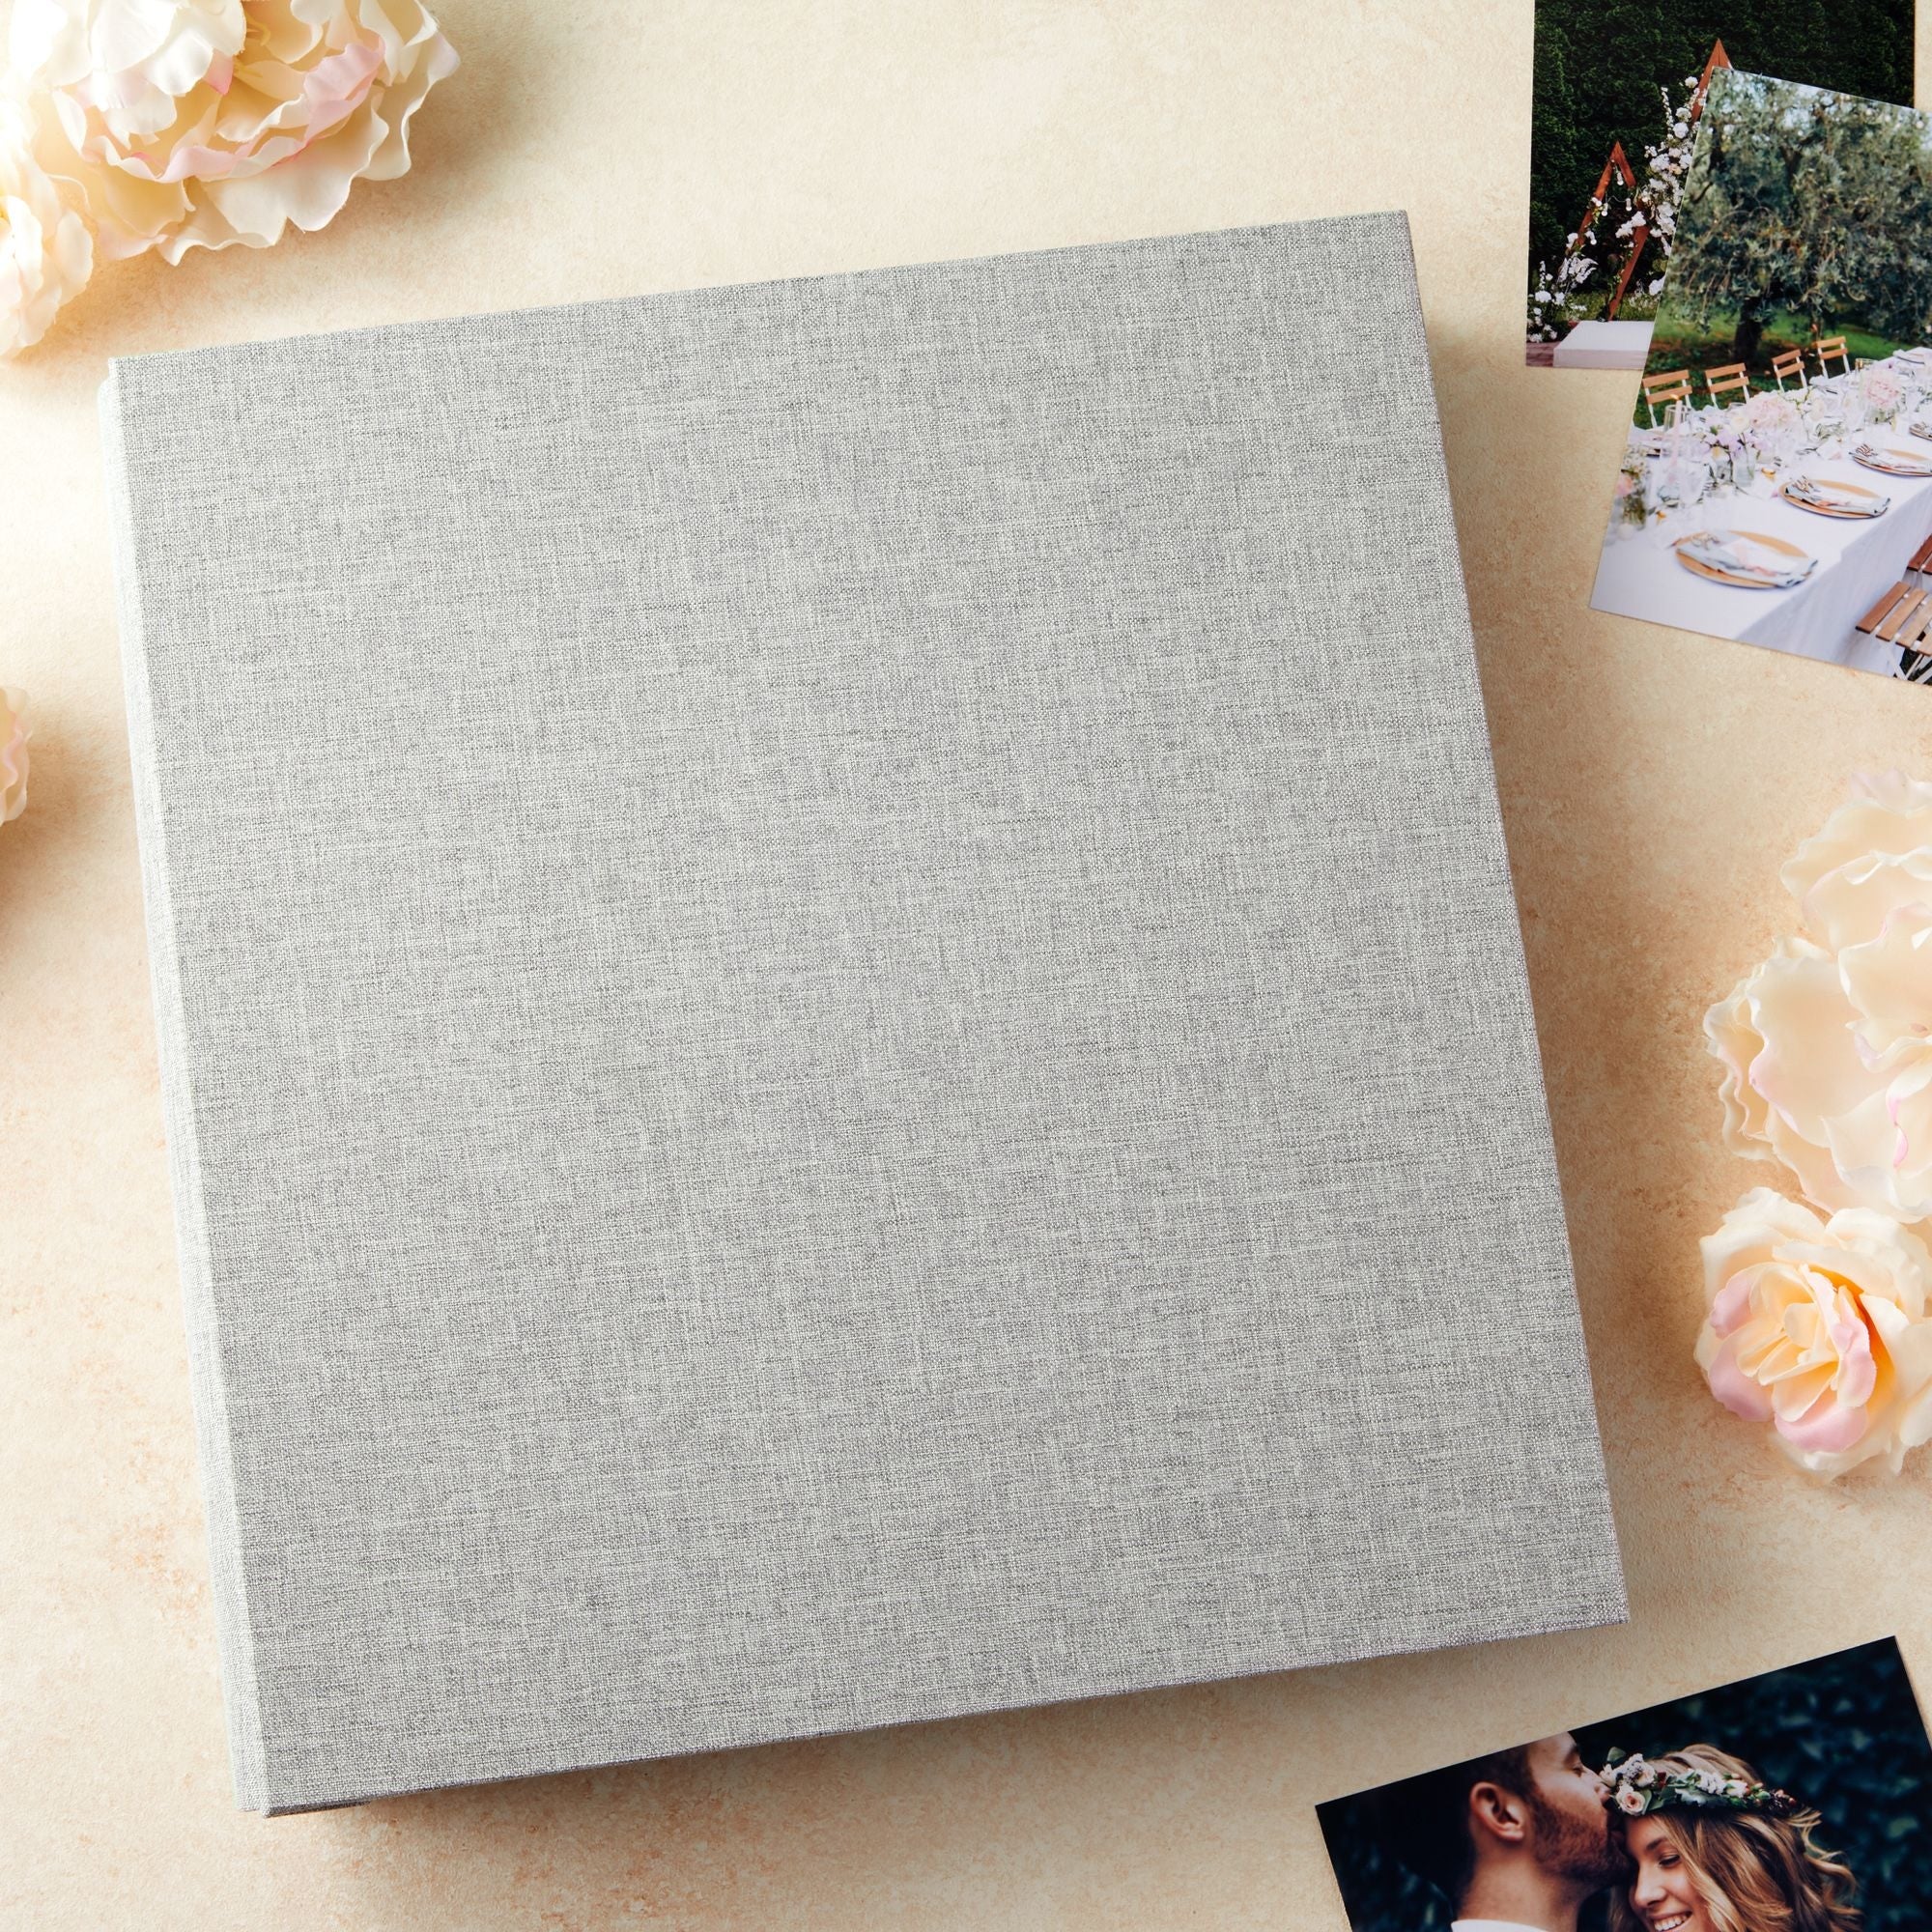 Photo Album 4x6 1000 Pockets, Extra Large Capacity Linen Cover Picture  Albums